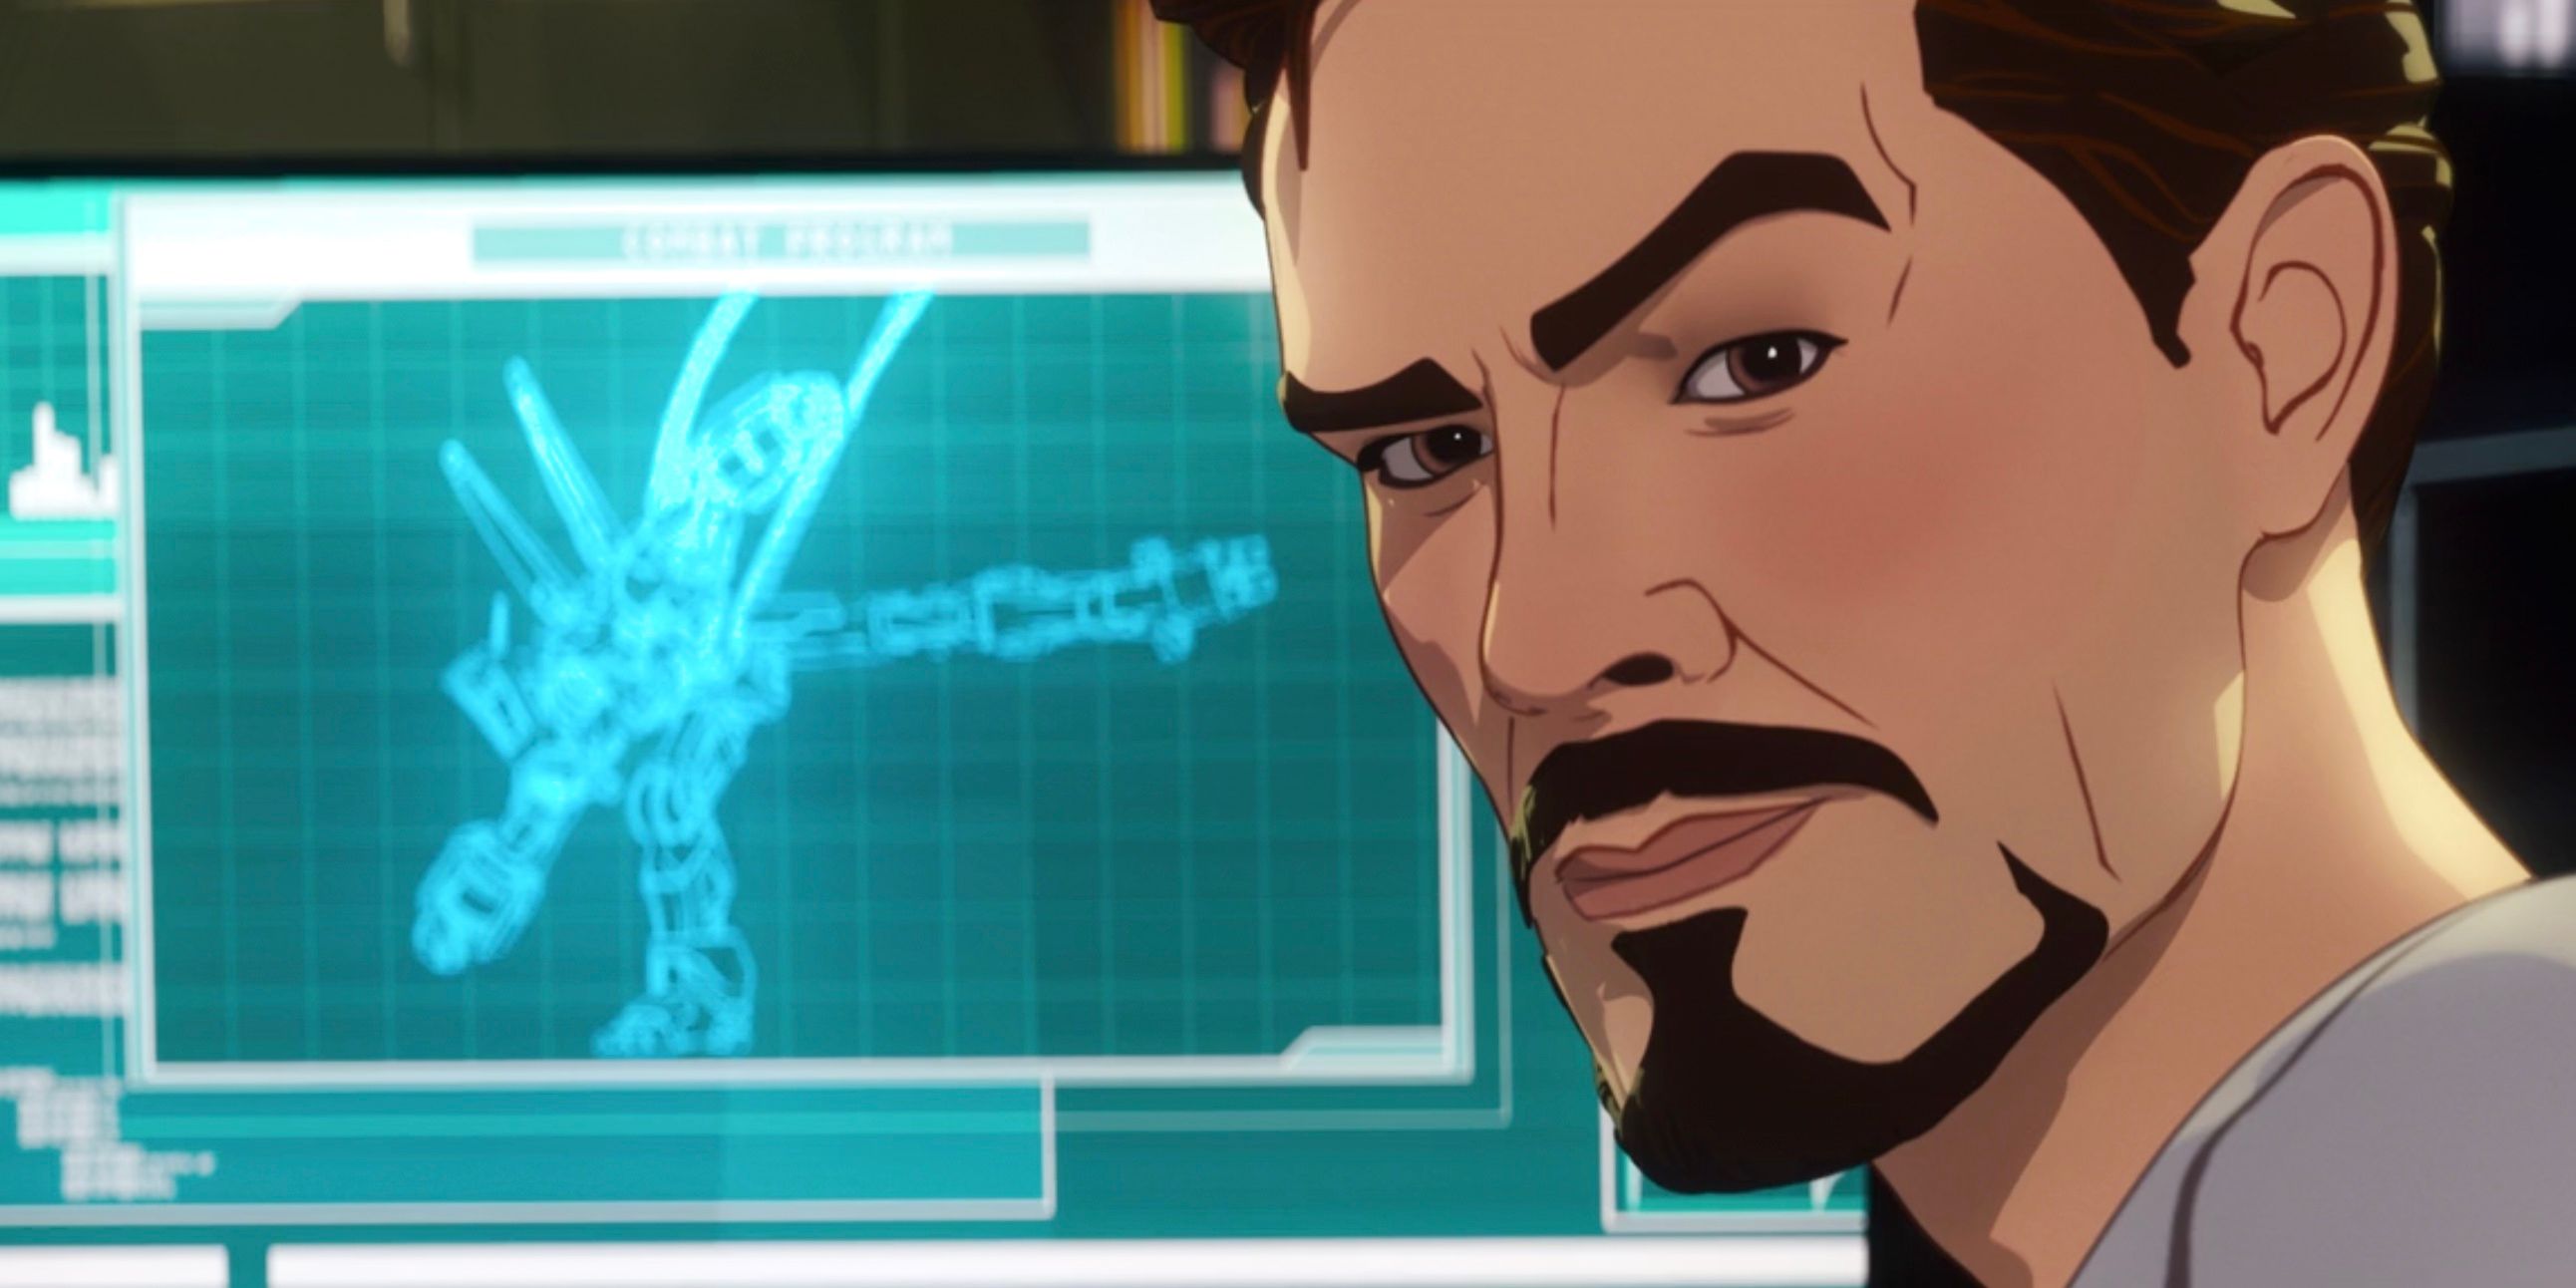 Tony Stark raising his eyebrow with a computer screen showing a Gundam-like Liberator model in the background in Marvel's What If...?